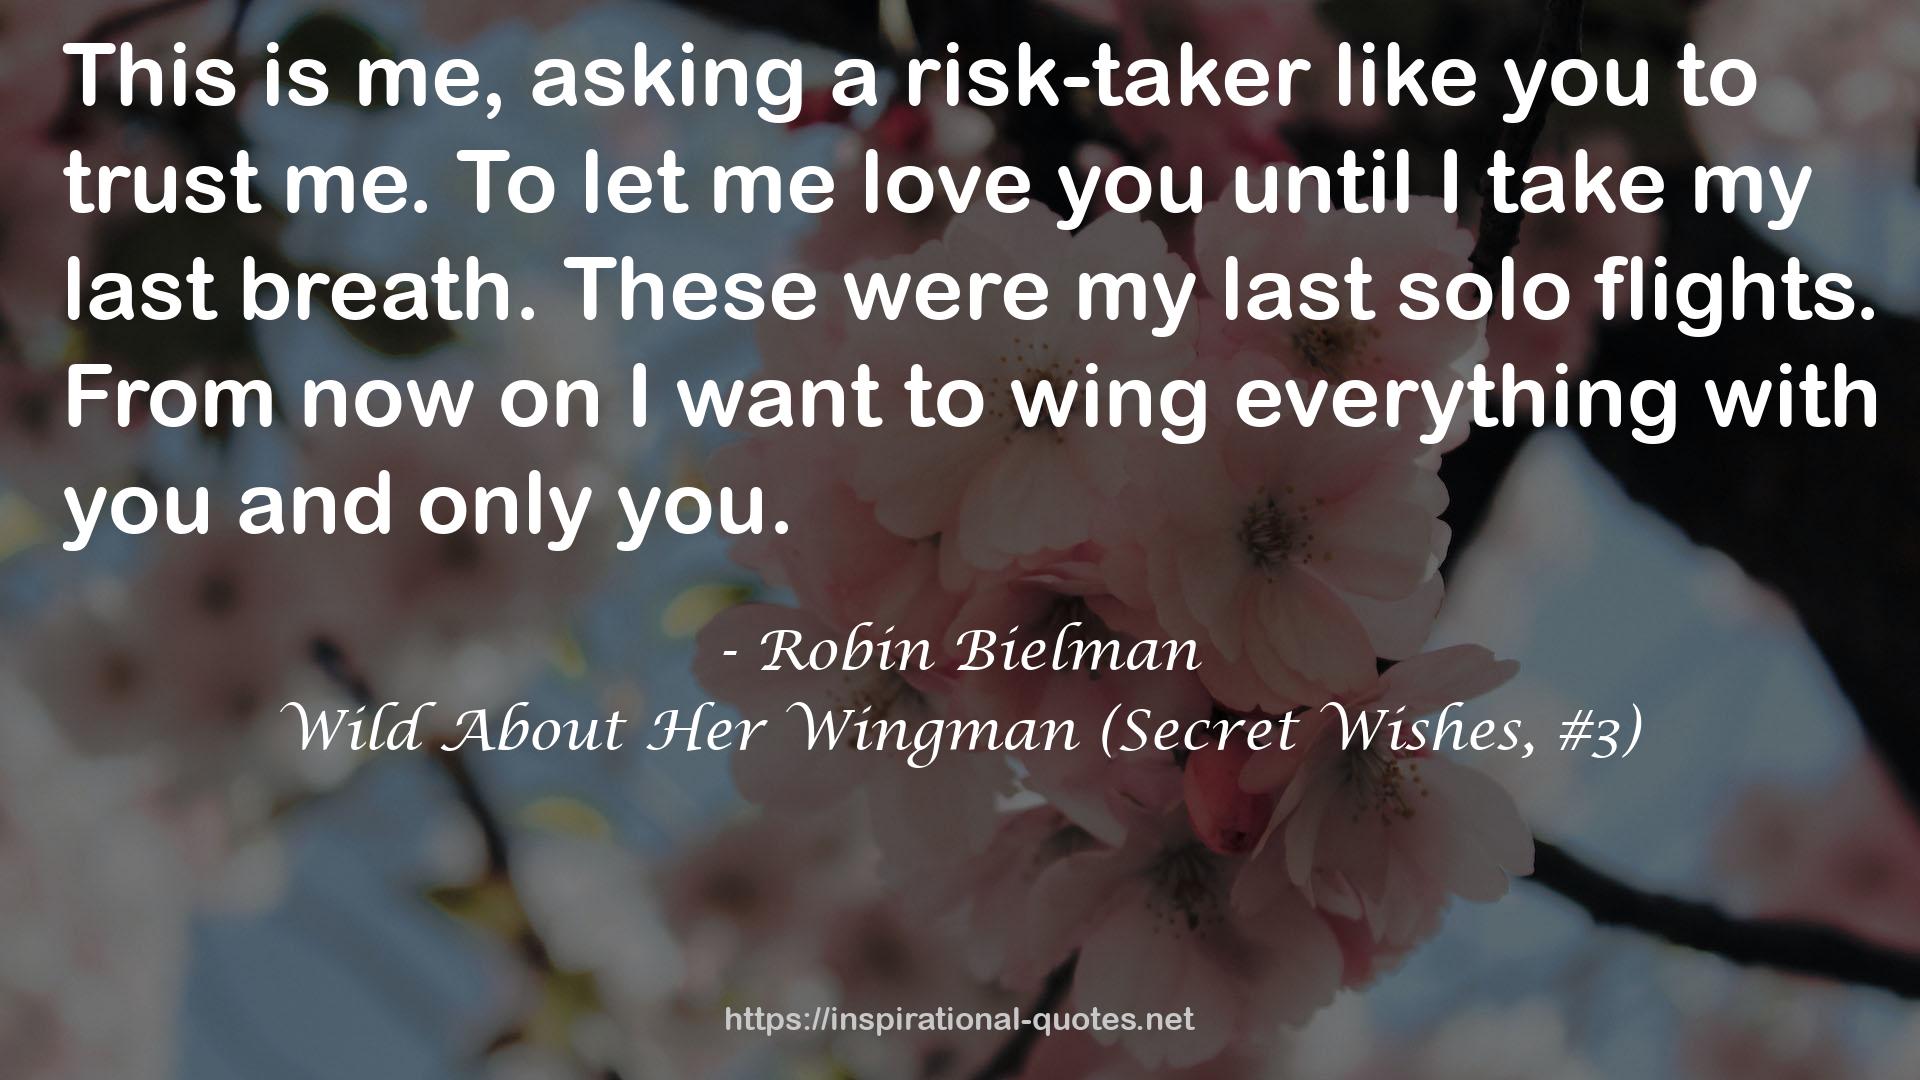 a risk-taker  QUOTES